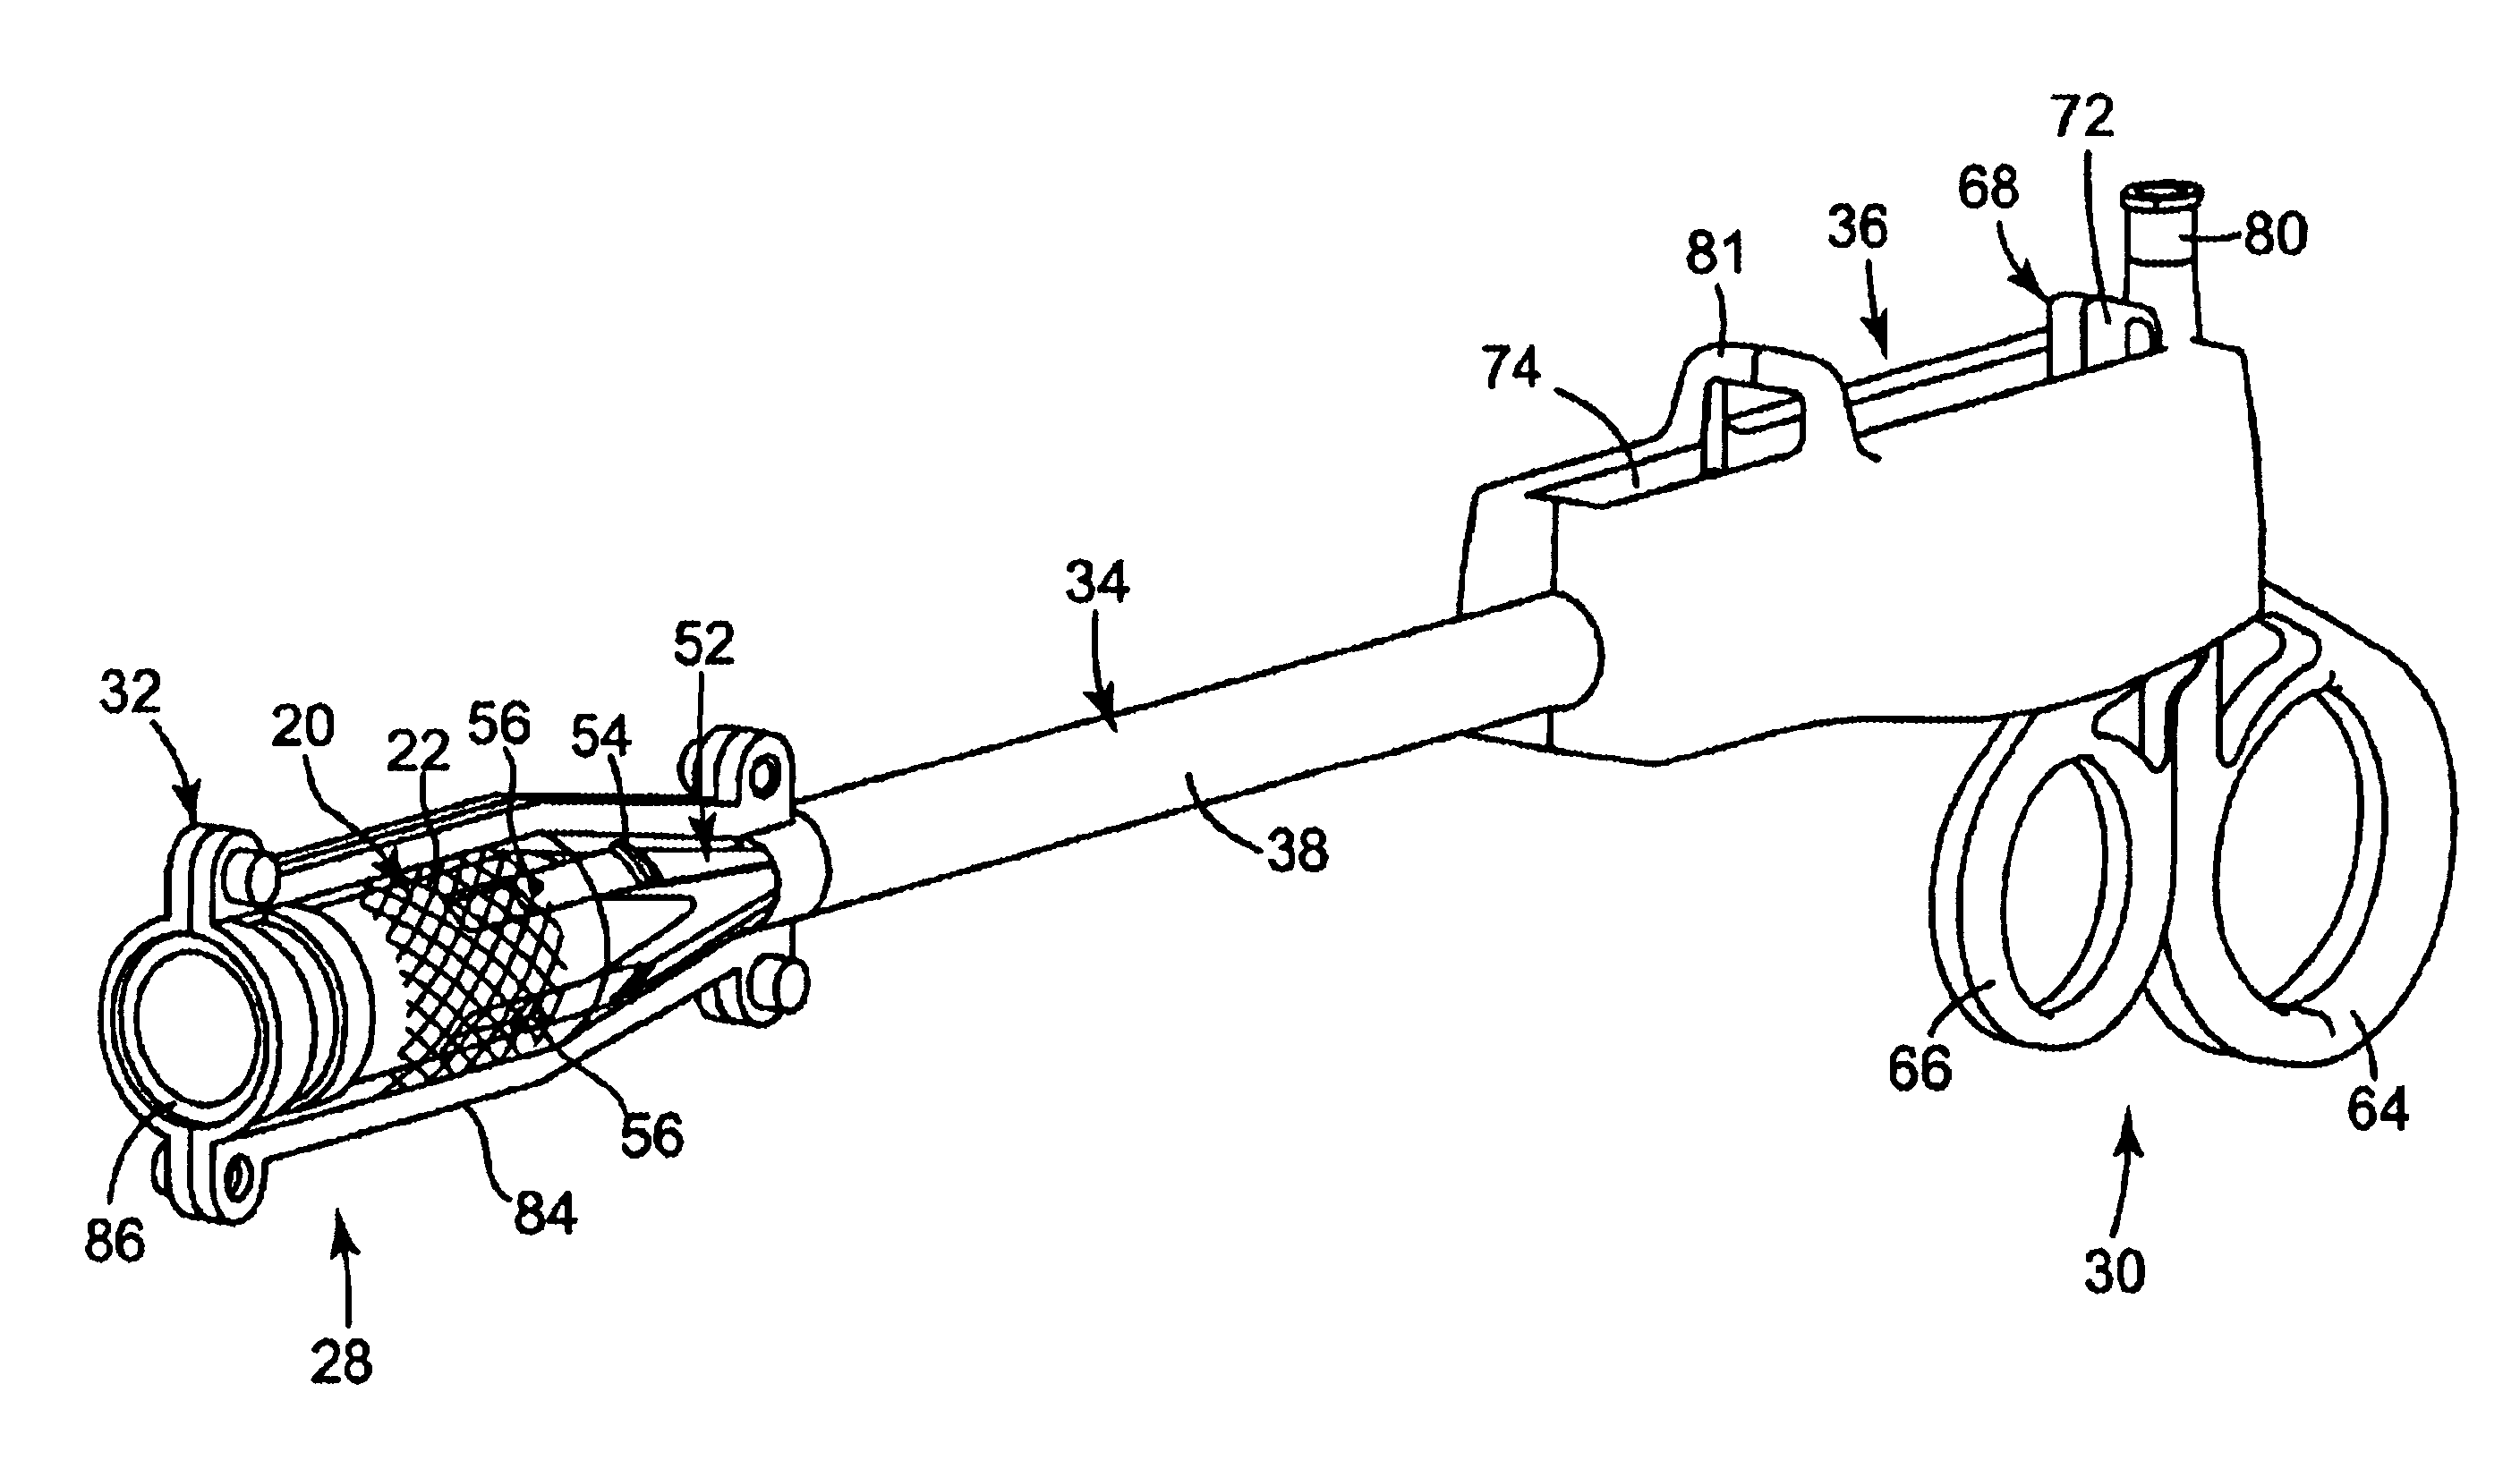 Stent delivery device and method